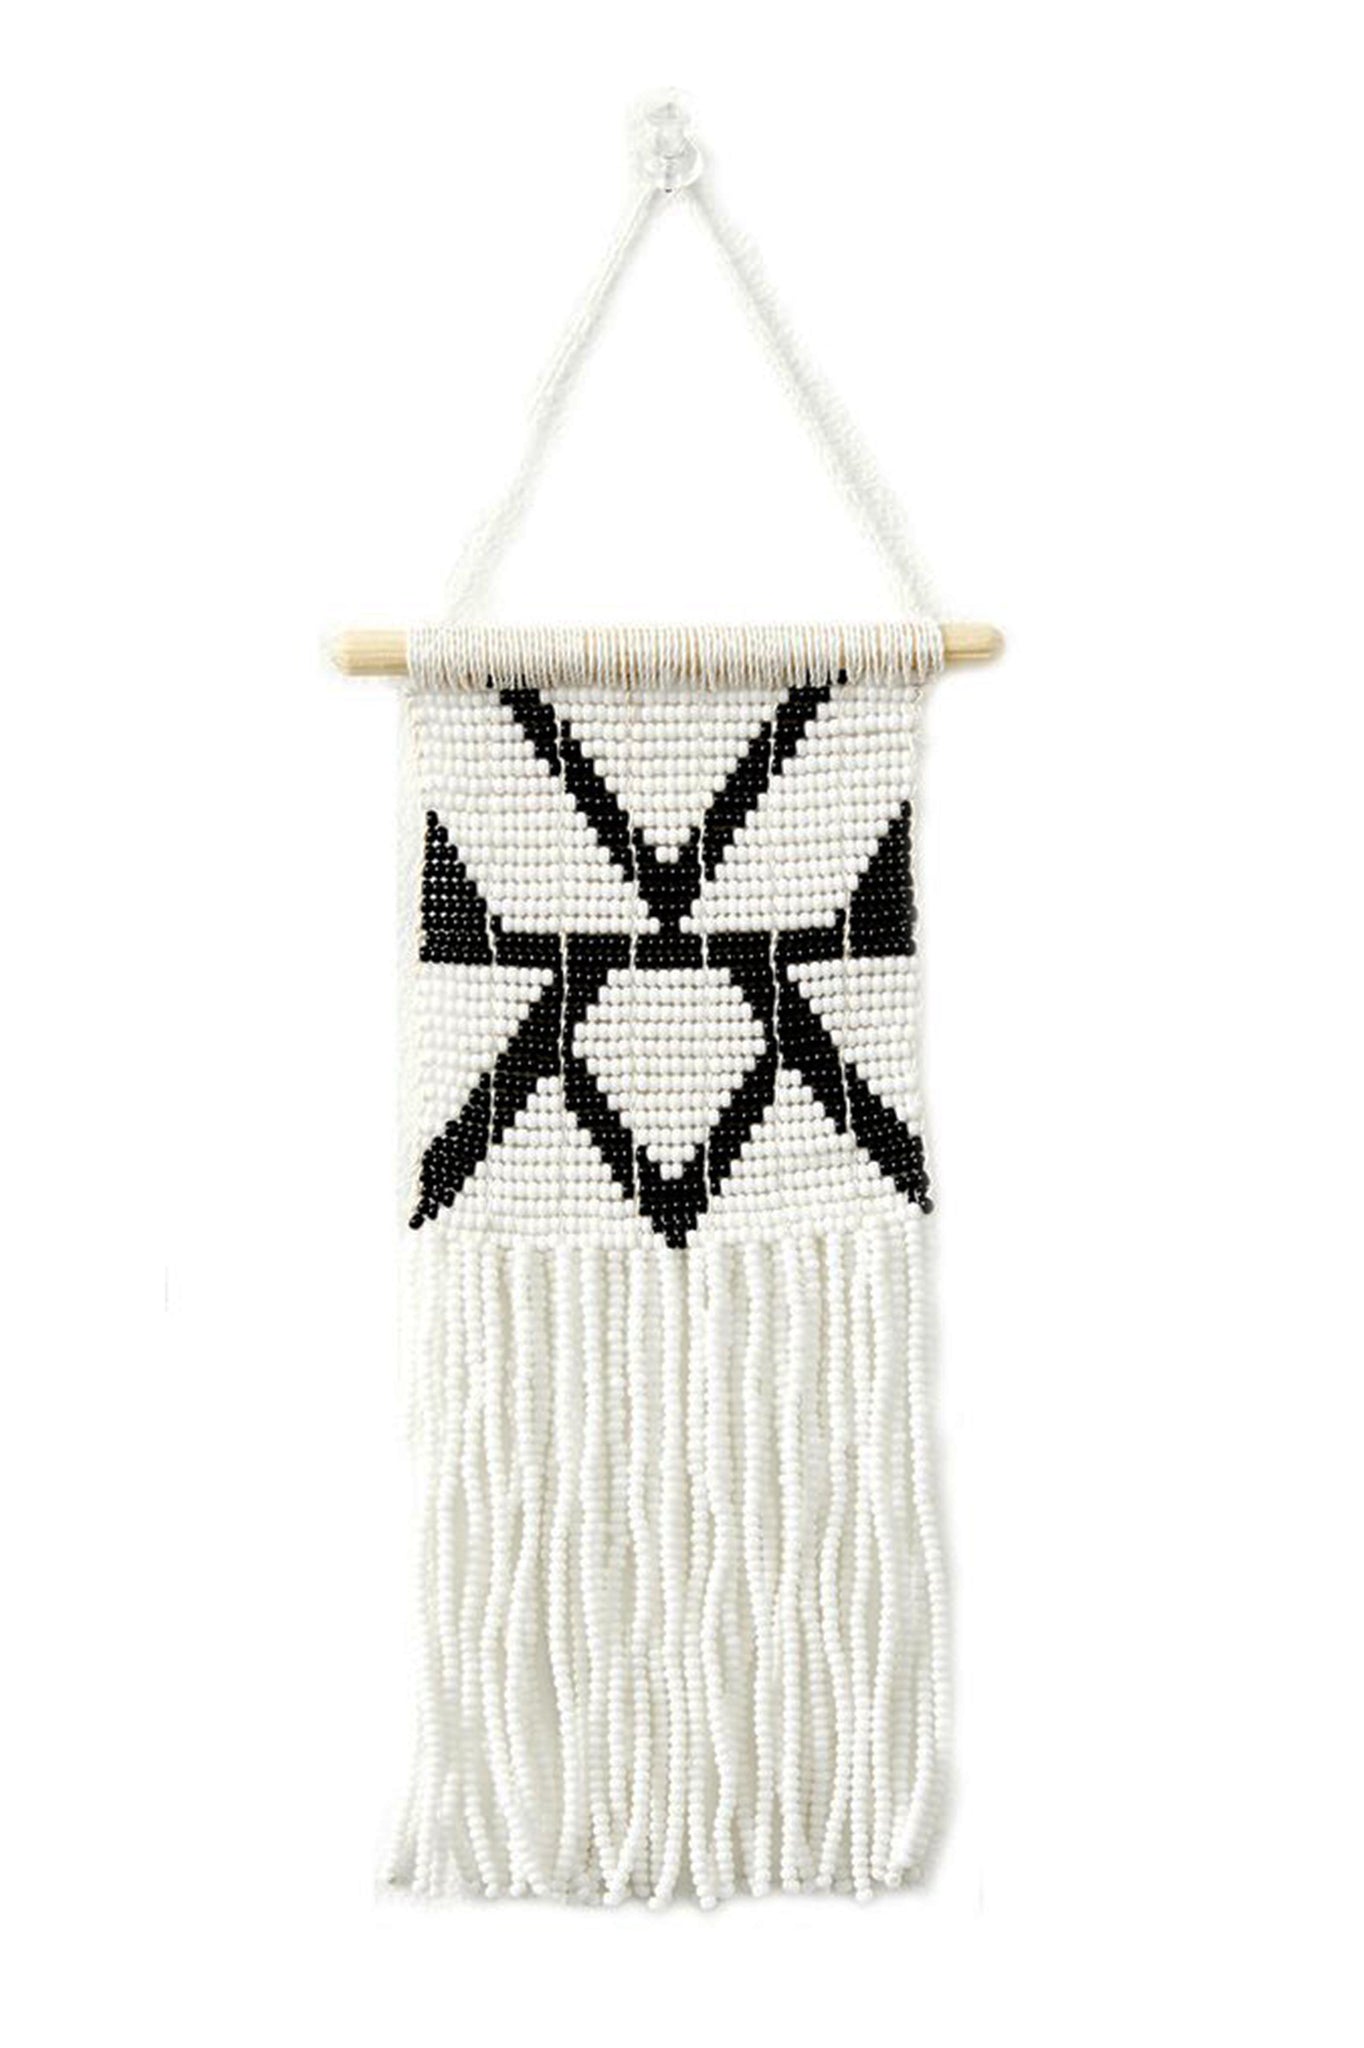 Rhombus Beaded Wall Hanging by Sidai Designs. Handmade in Tanzania. Glass beaded wall hanging with a beaded fringe finish. The beaded panel is handwoven together with recycled grain sacks onto a wooden dowel. Color black and white.